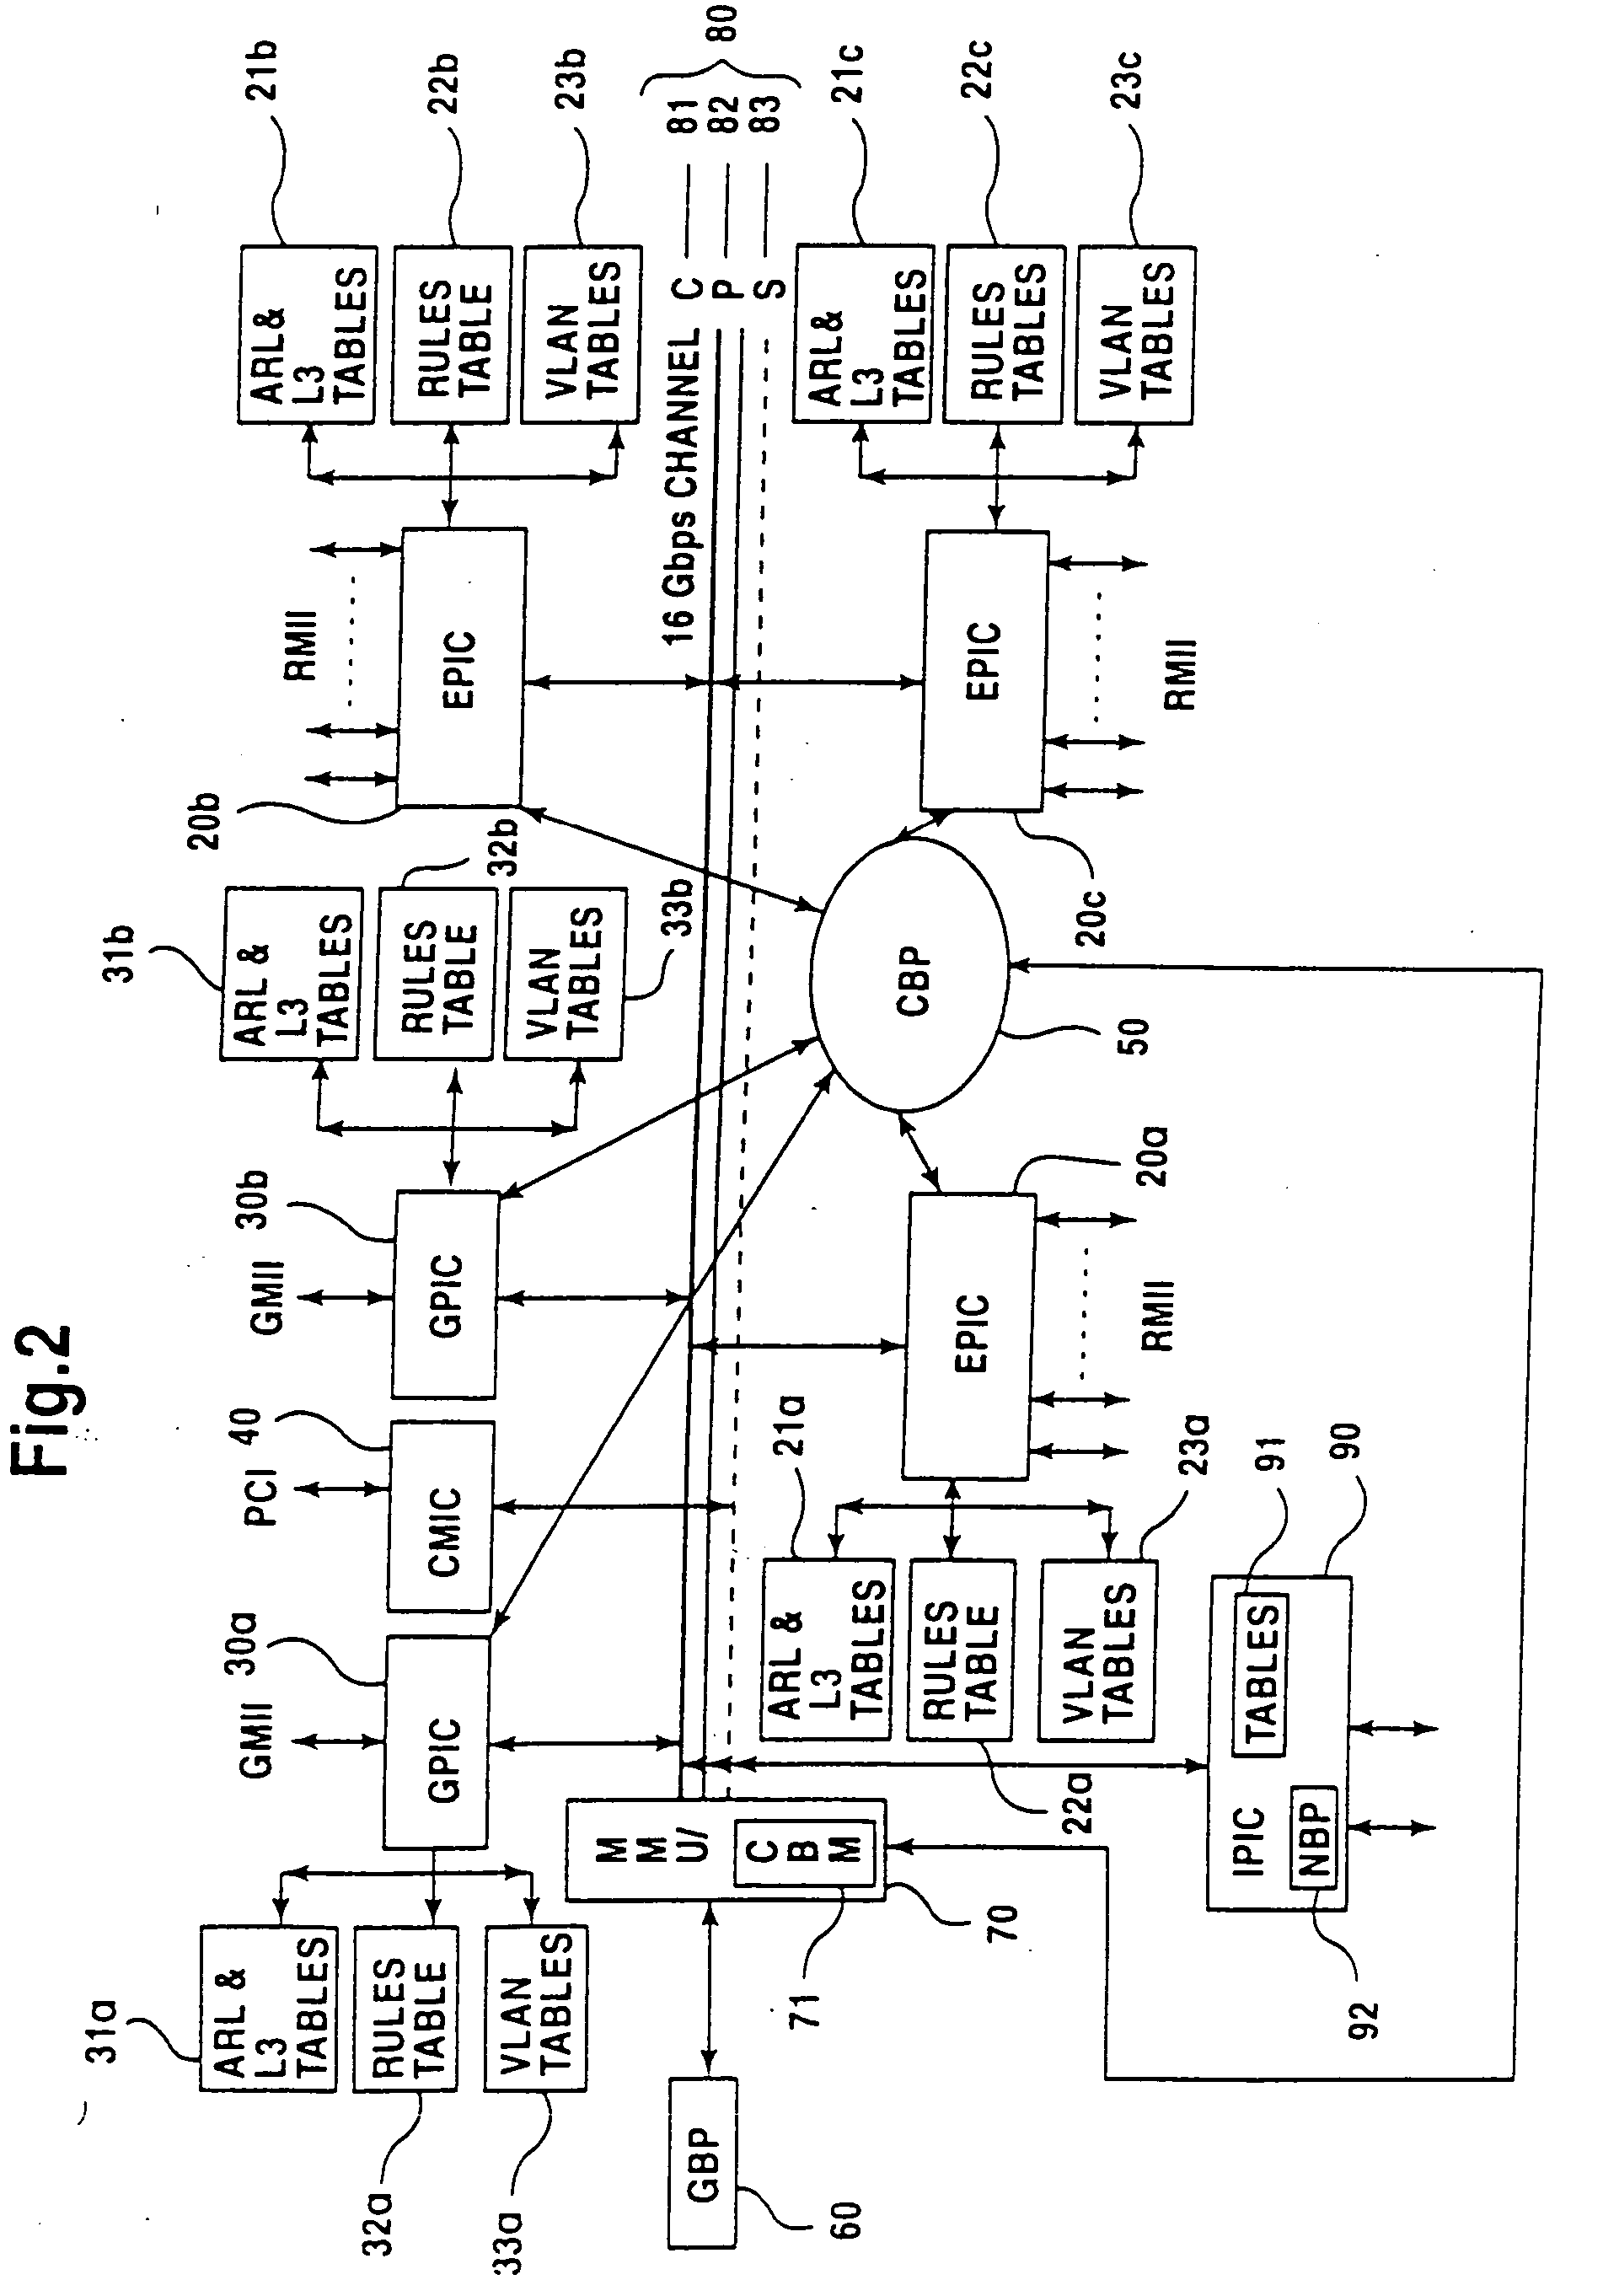 Apparatus and method for managing memory defects